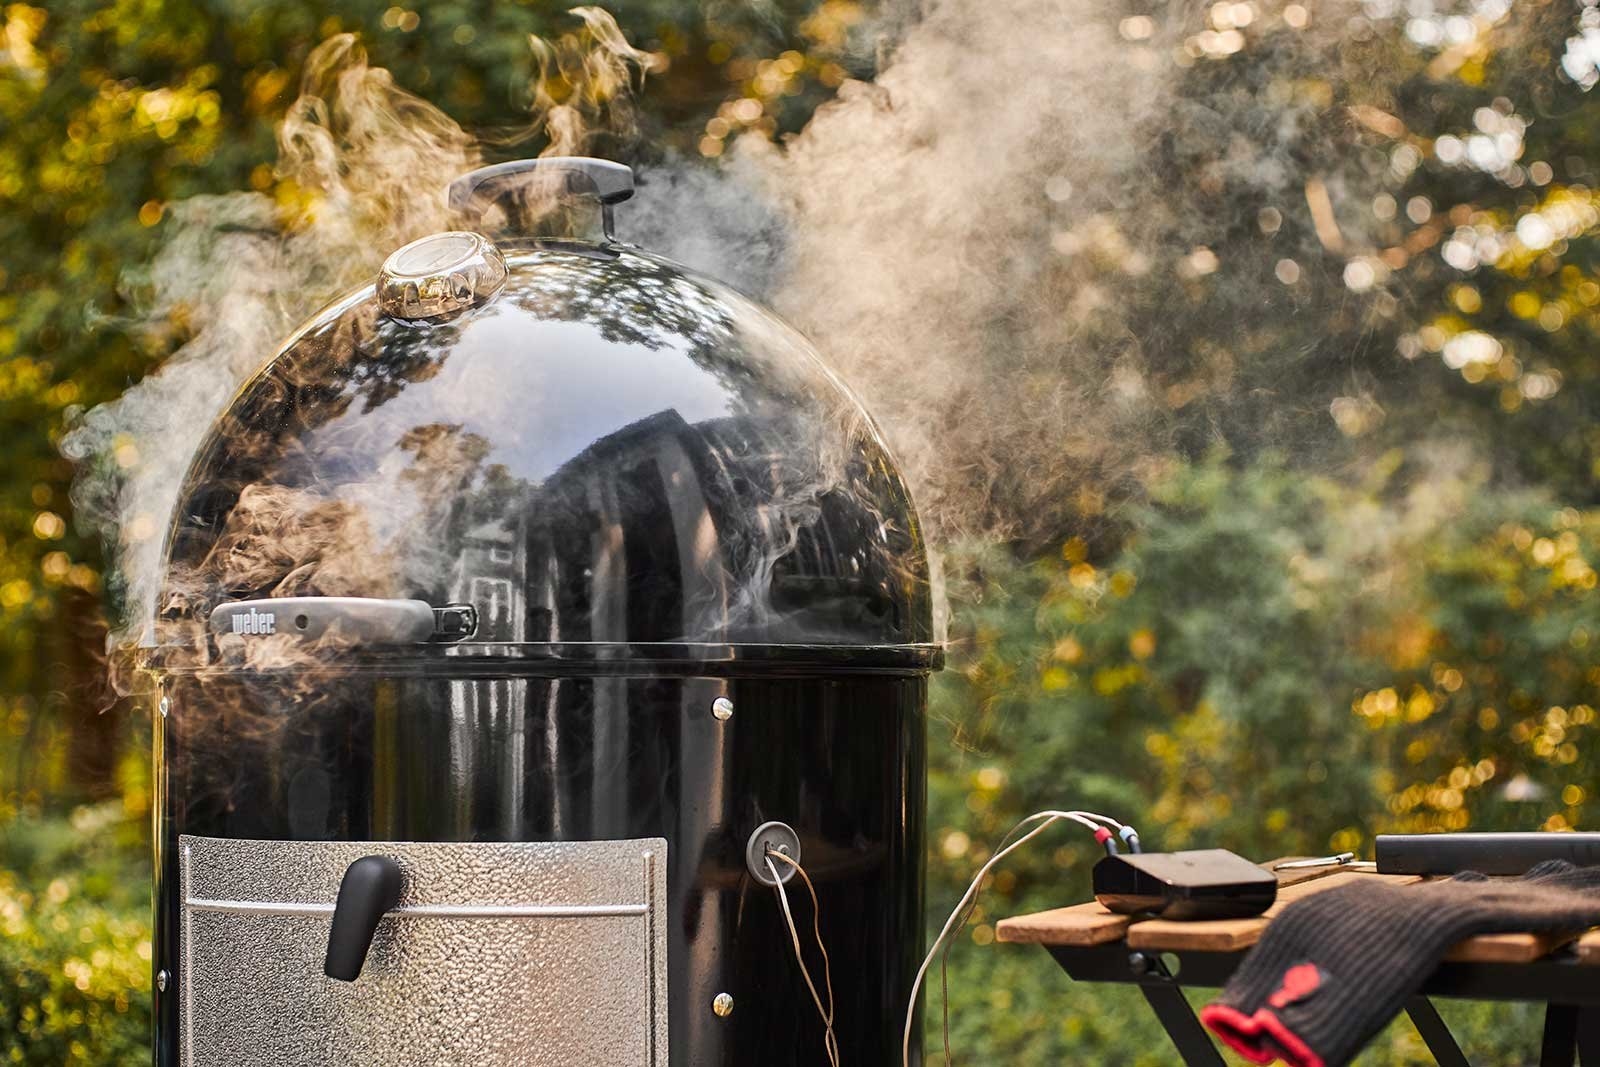 Weber's grilling hub equips any grill with WiFi smarts | DeviceDaily.com